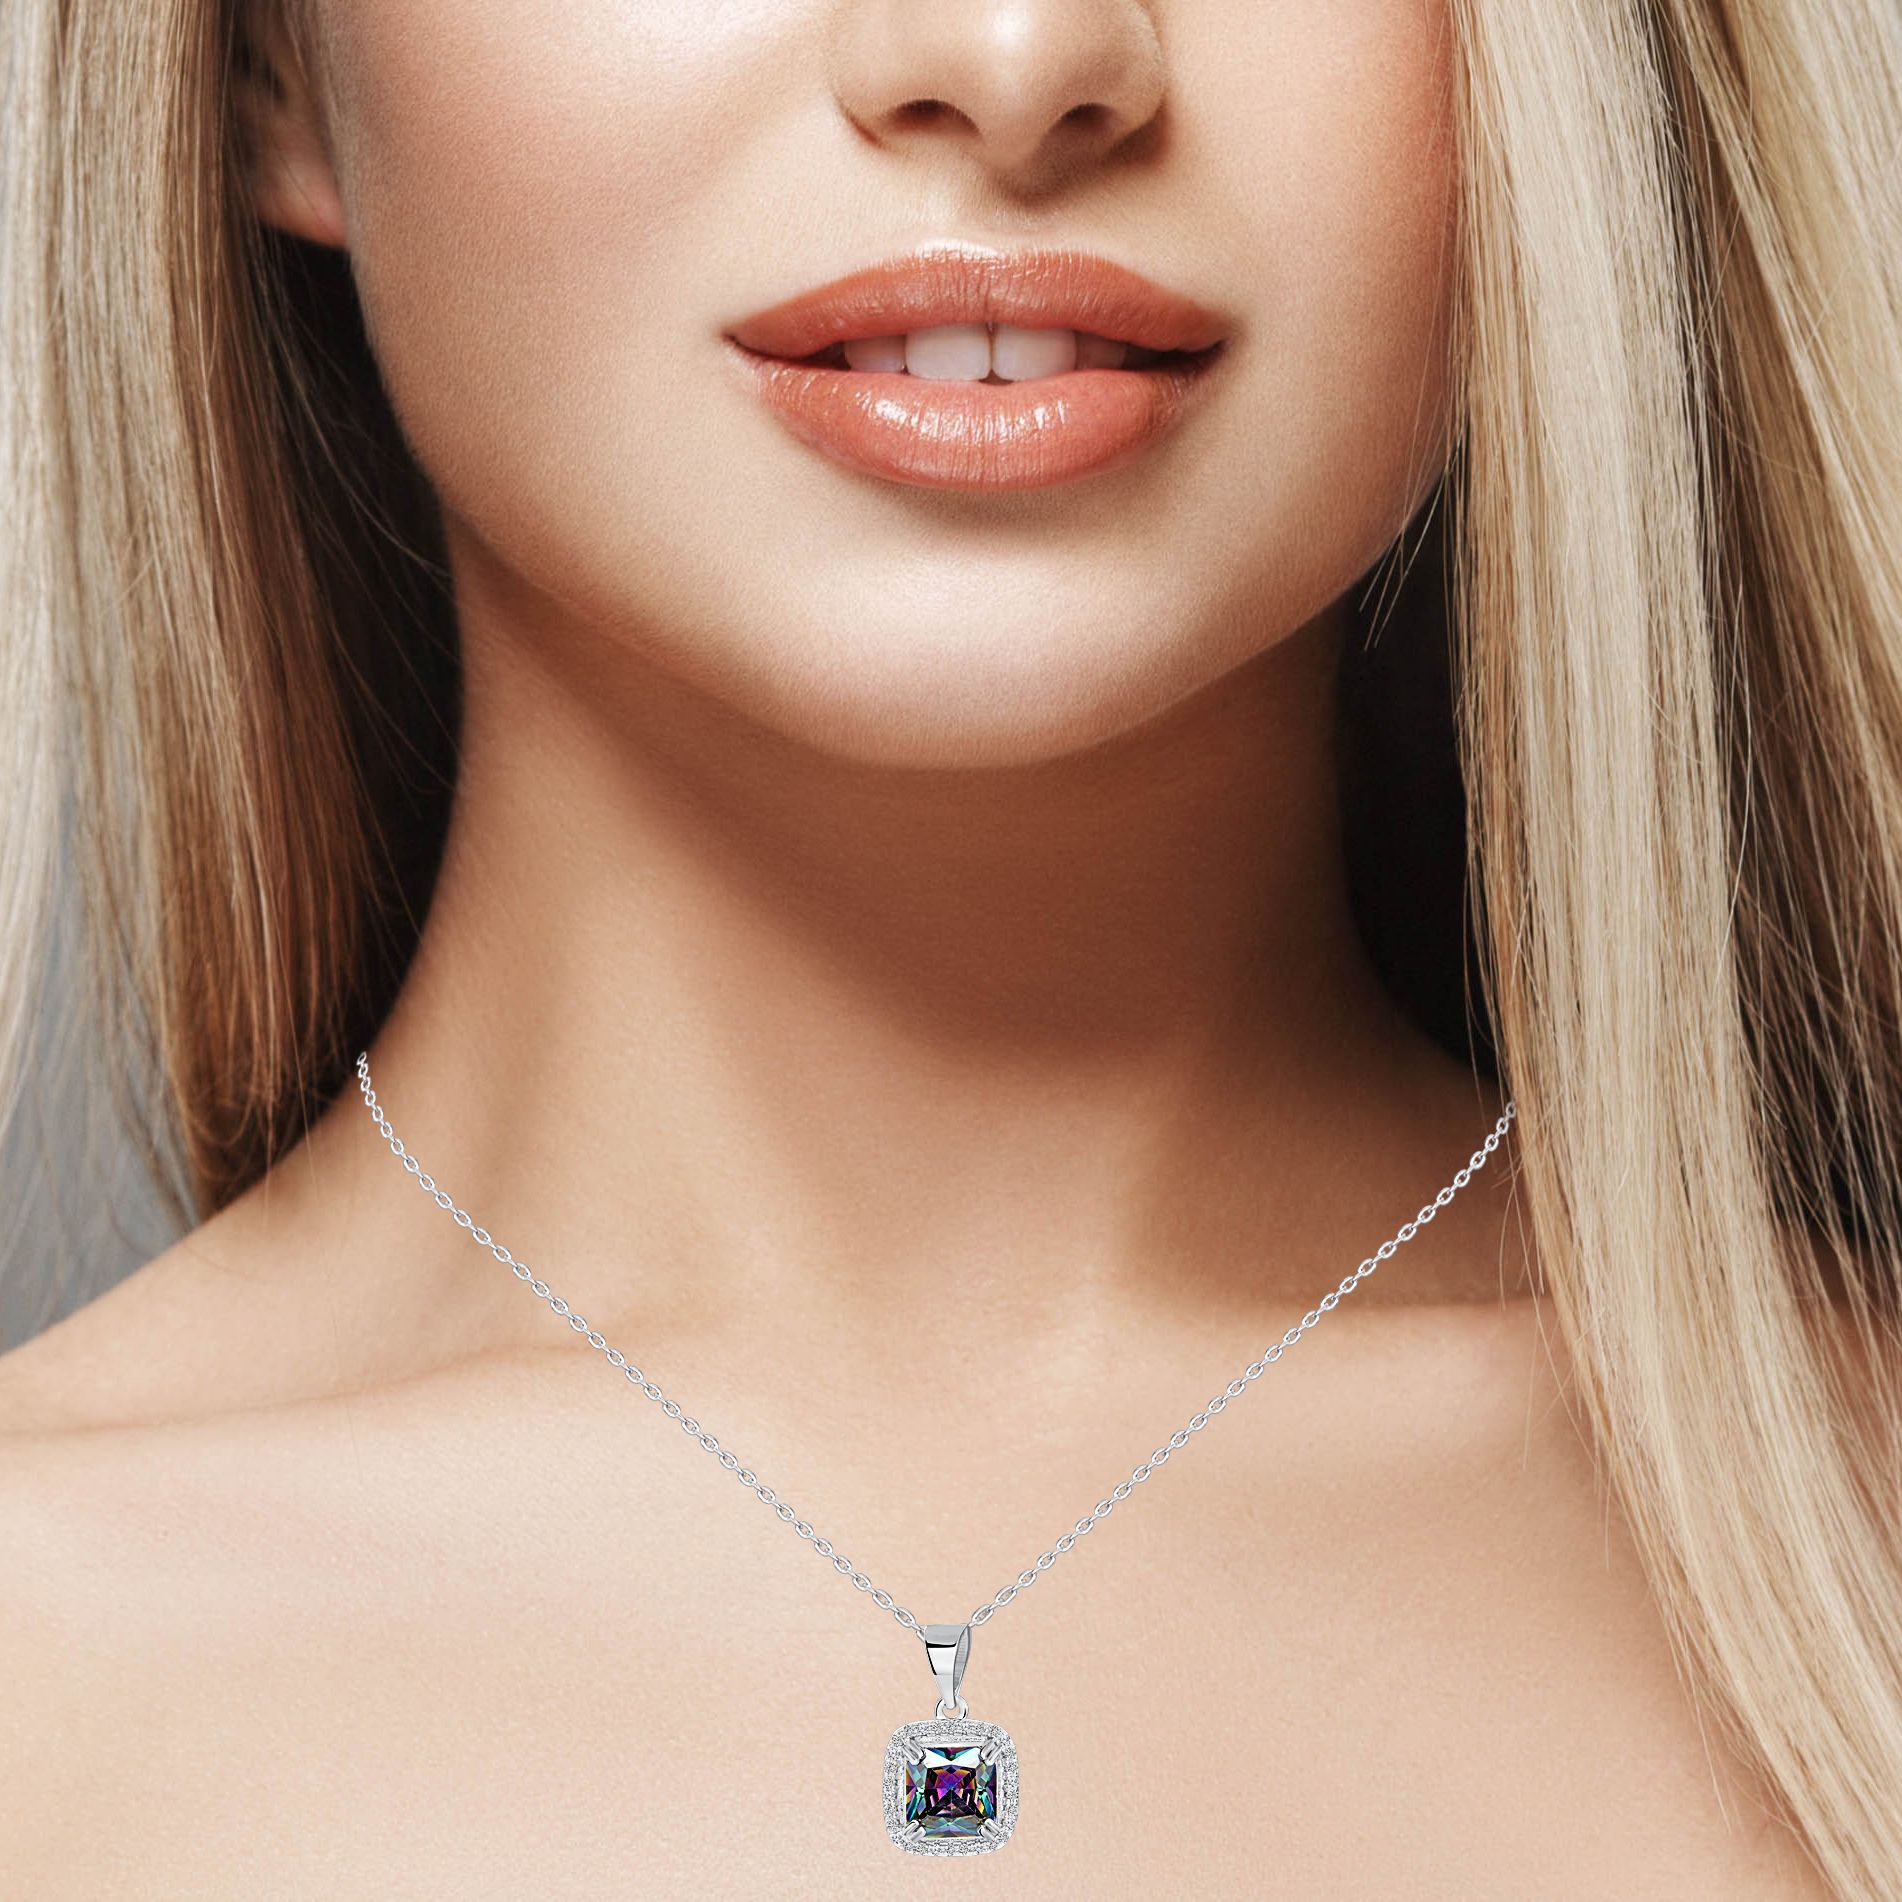 925 Sterling Silver Square Cut Mystic Topaz with White CZ Halo Pendant &amp; Stud Earrings Jewelry Set